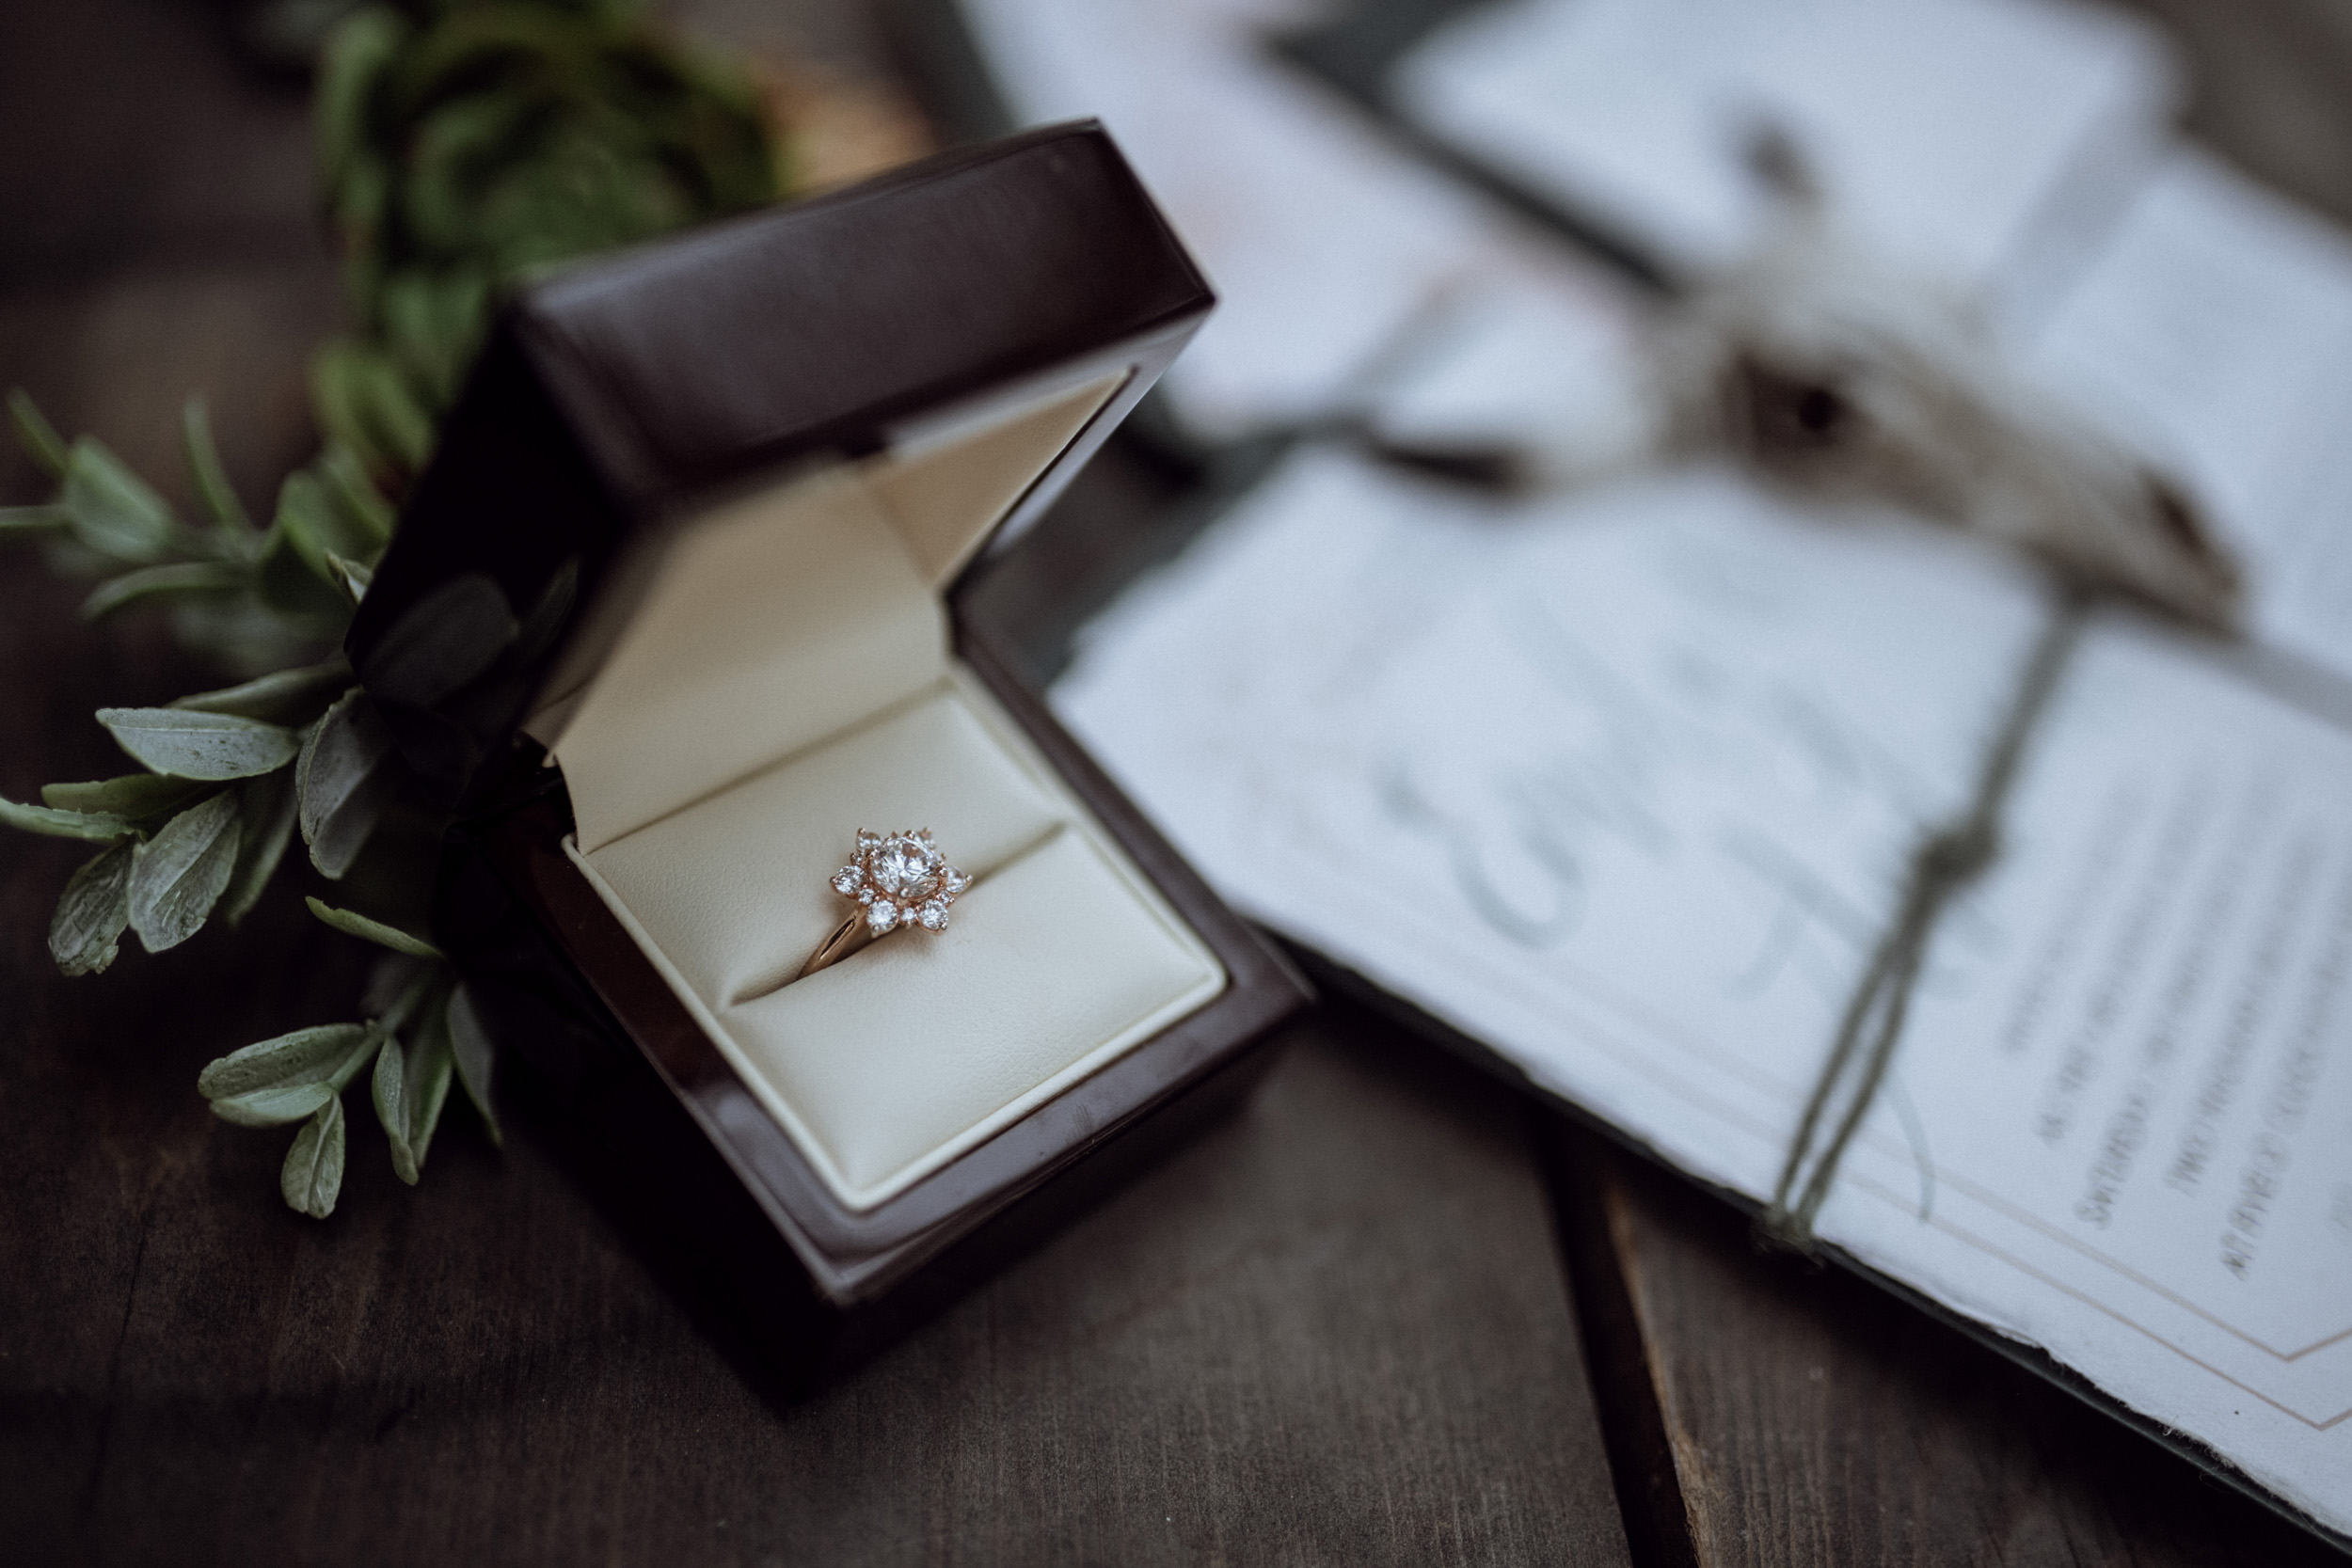 rose gold wedding ring on wooden table with stationary